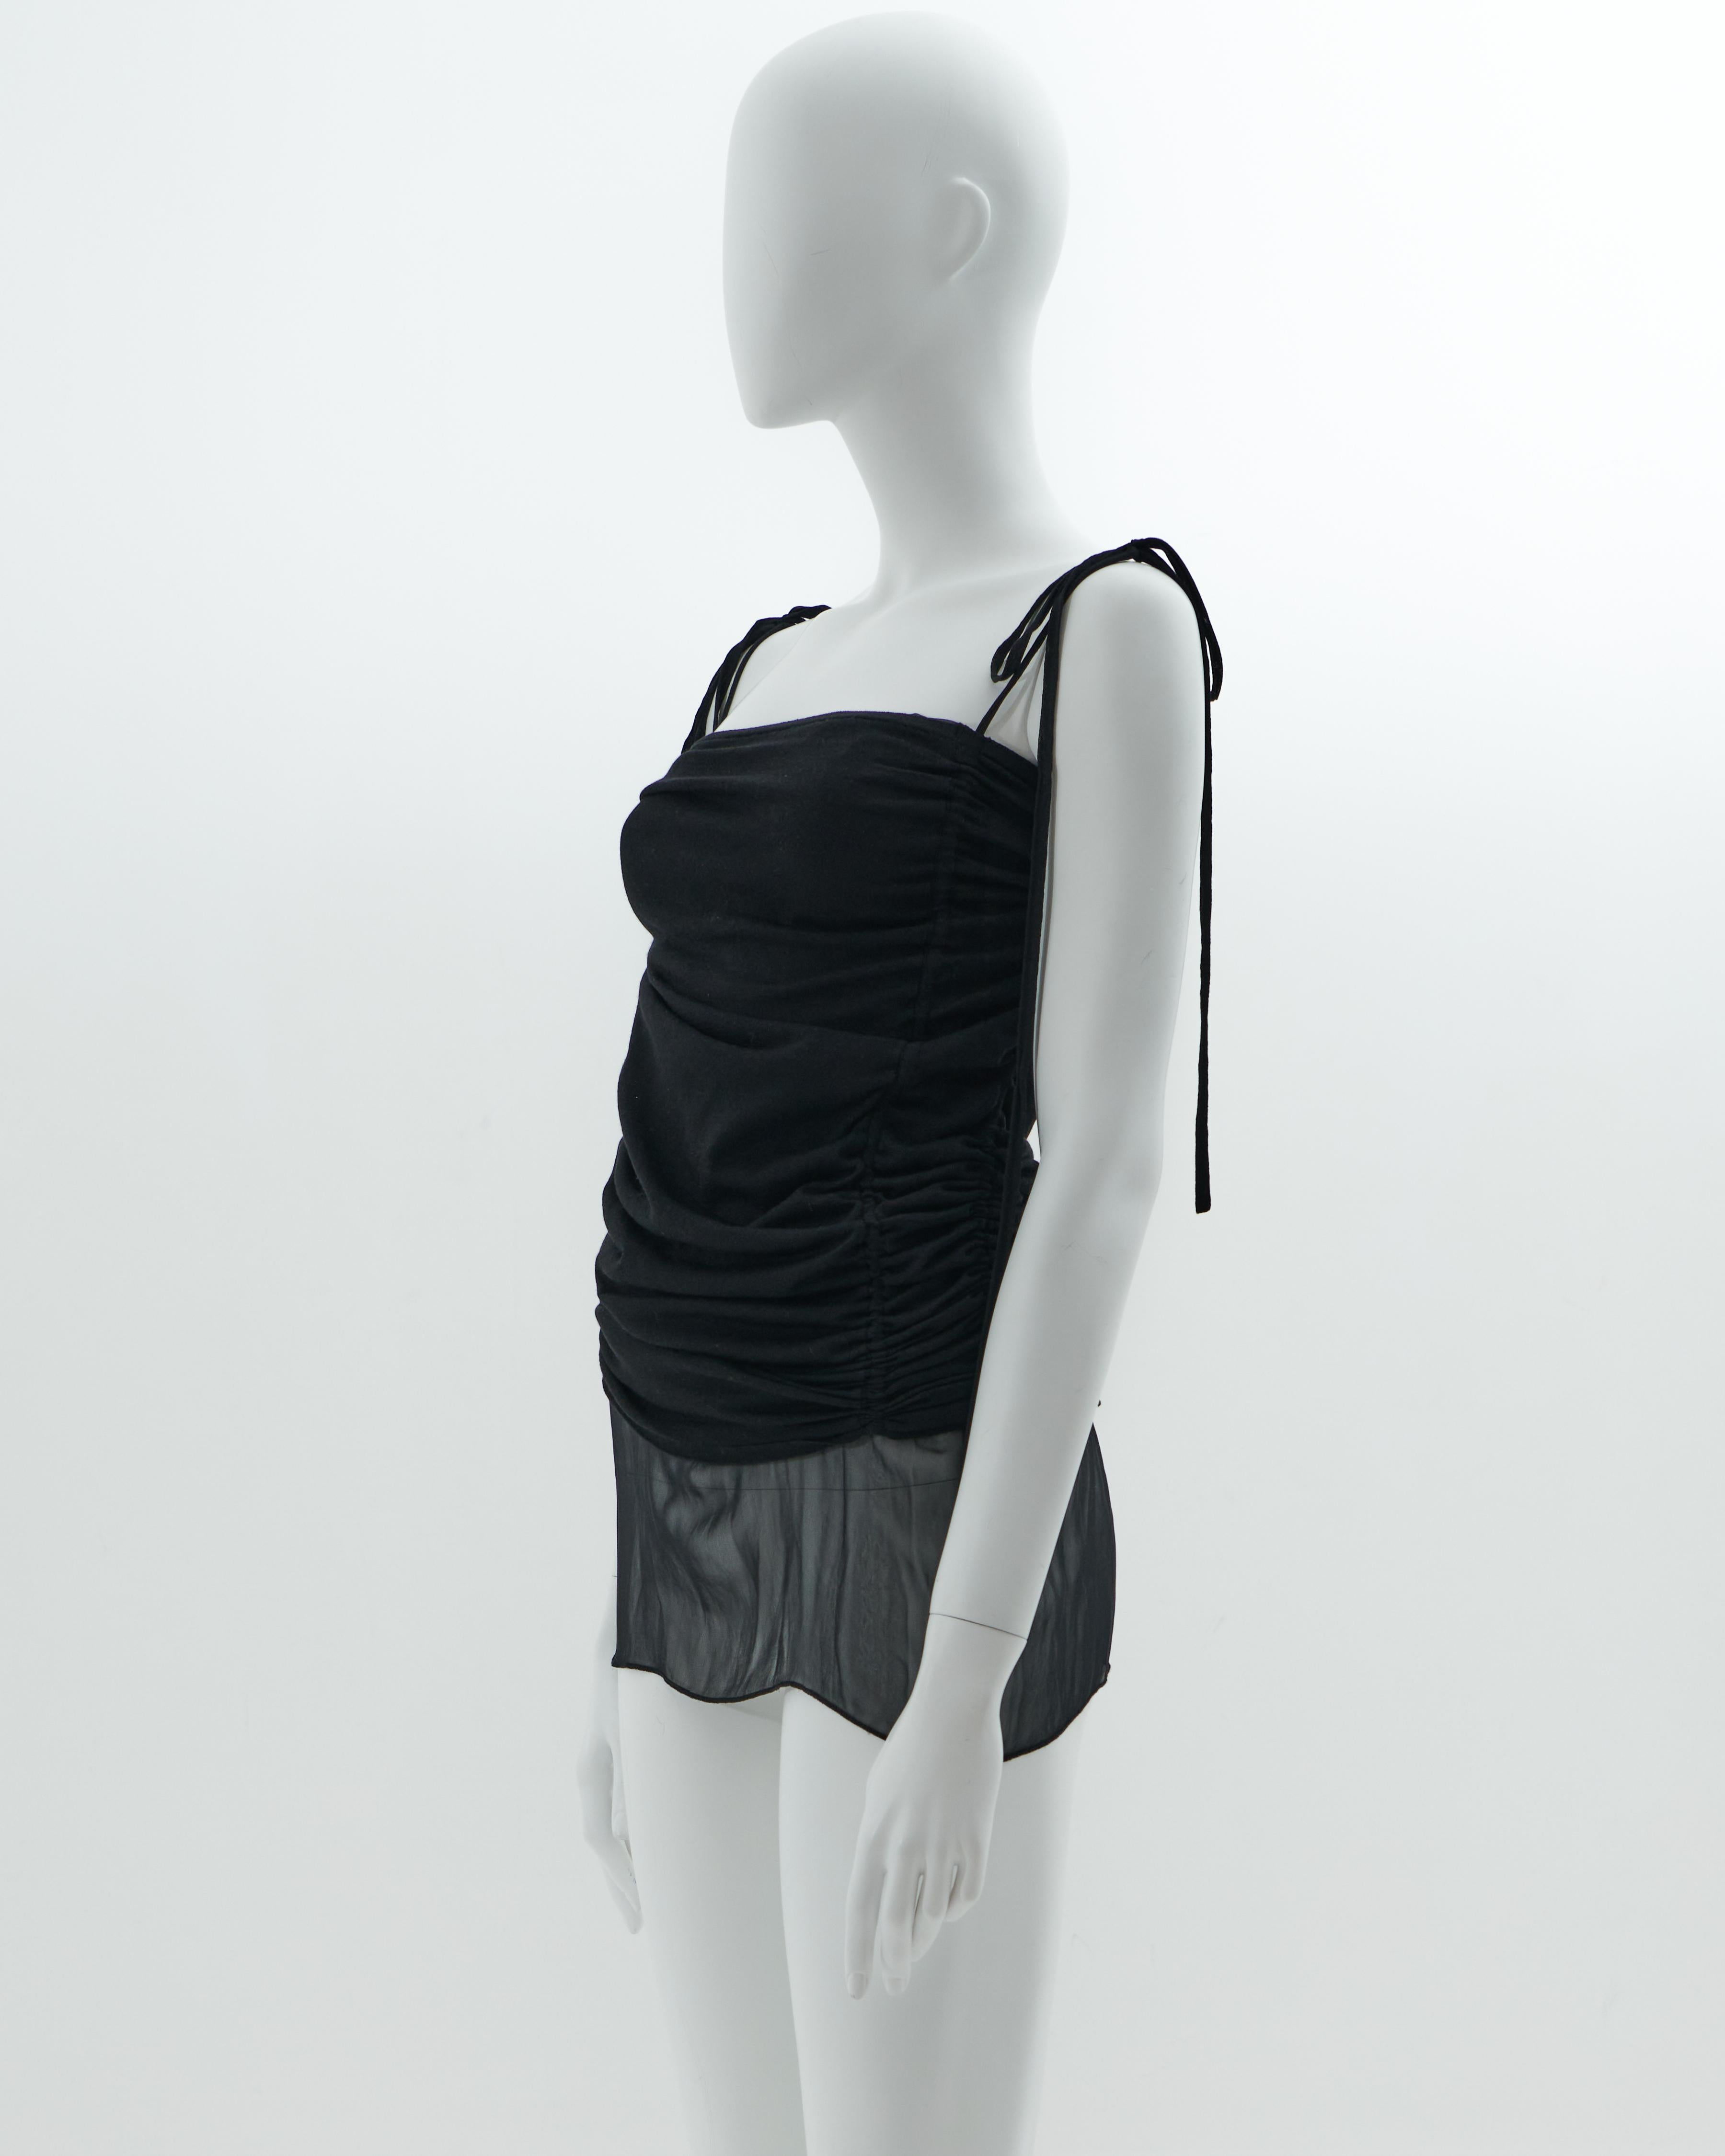 - Designed by Tom Ford 
- Sold by Skof.Archive 
- Spring-Summer 2003 
- Black silk draped top with adjustable straps 
- Vertical double adjustable drapes on hips 
- Made in Italy

Condition: Excellent 
Wear consistent with age and use. 
Light wear